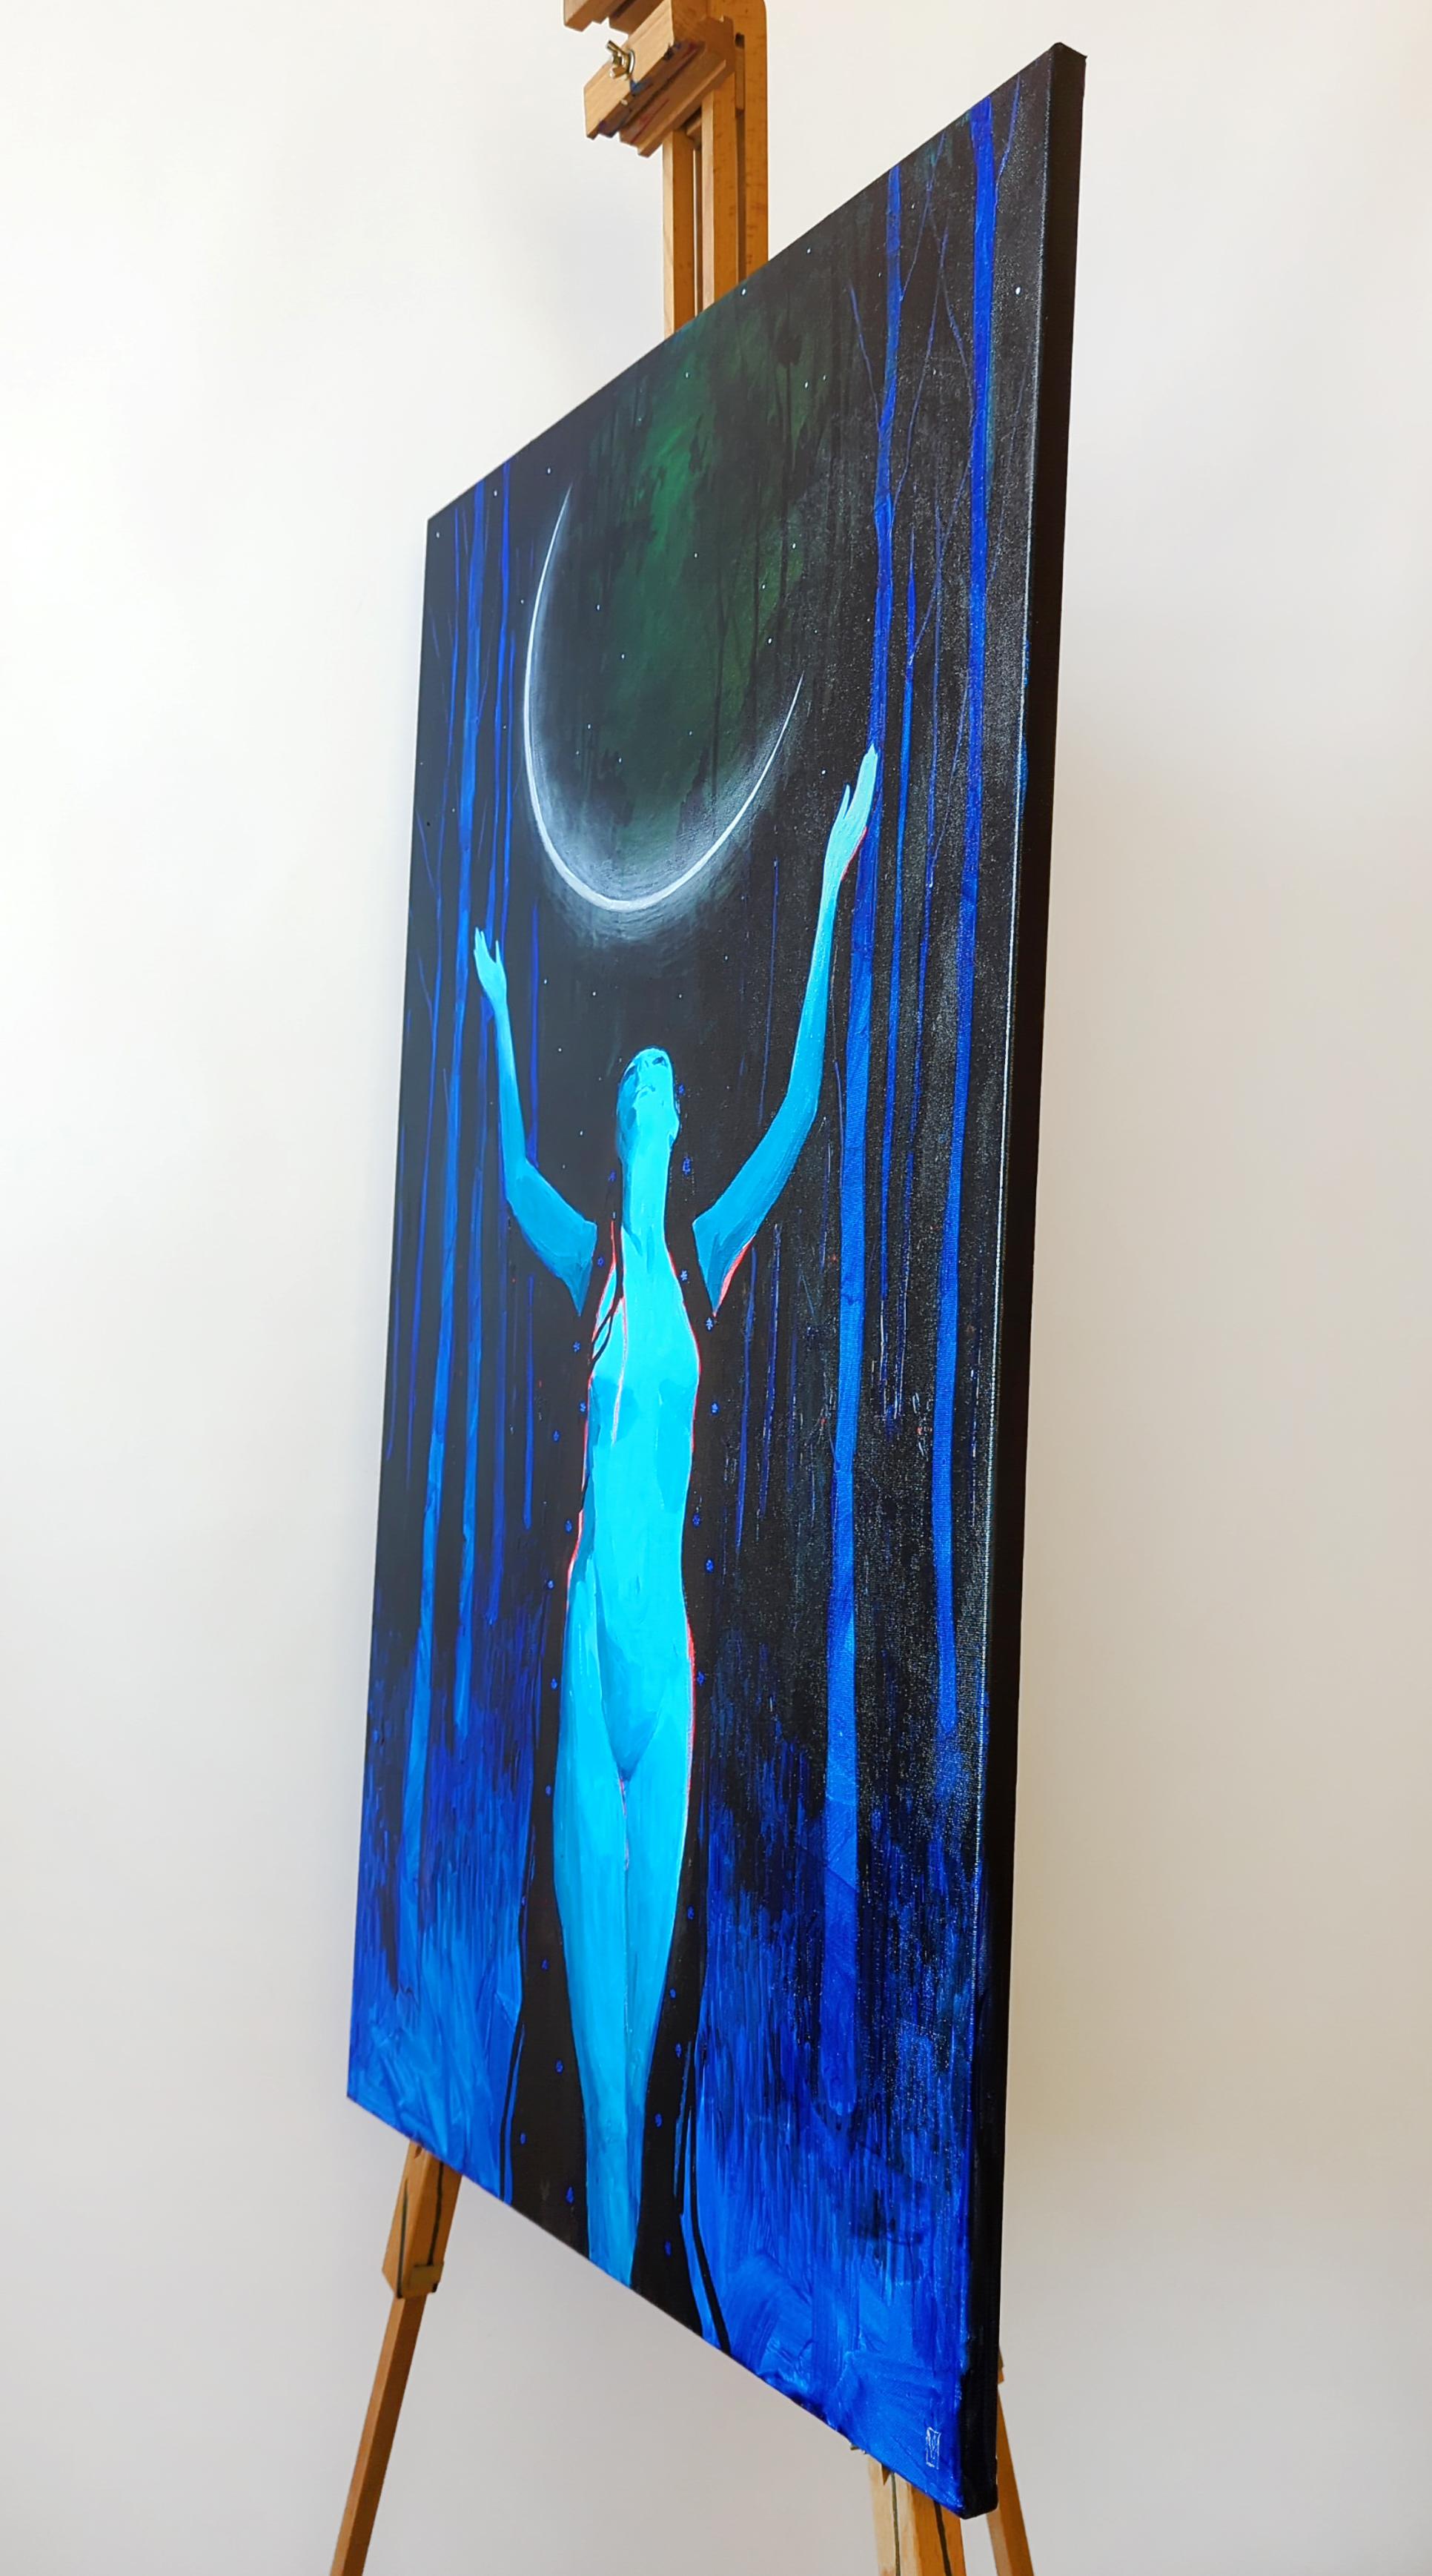 Eclipse, Melancholy serie - Painting by Olha Vlasova